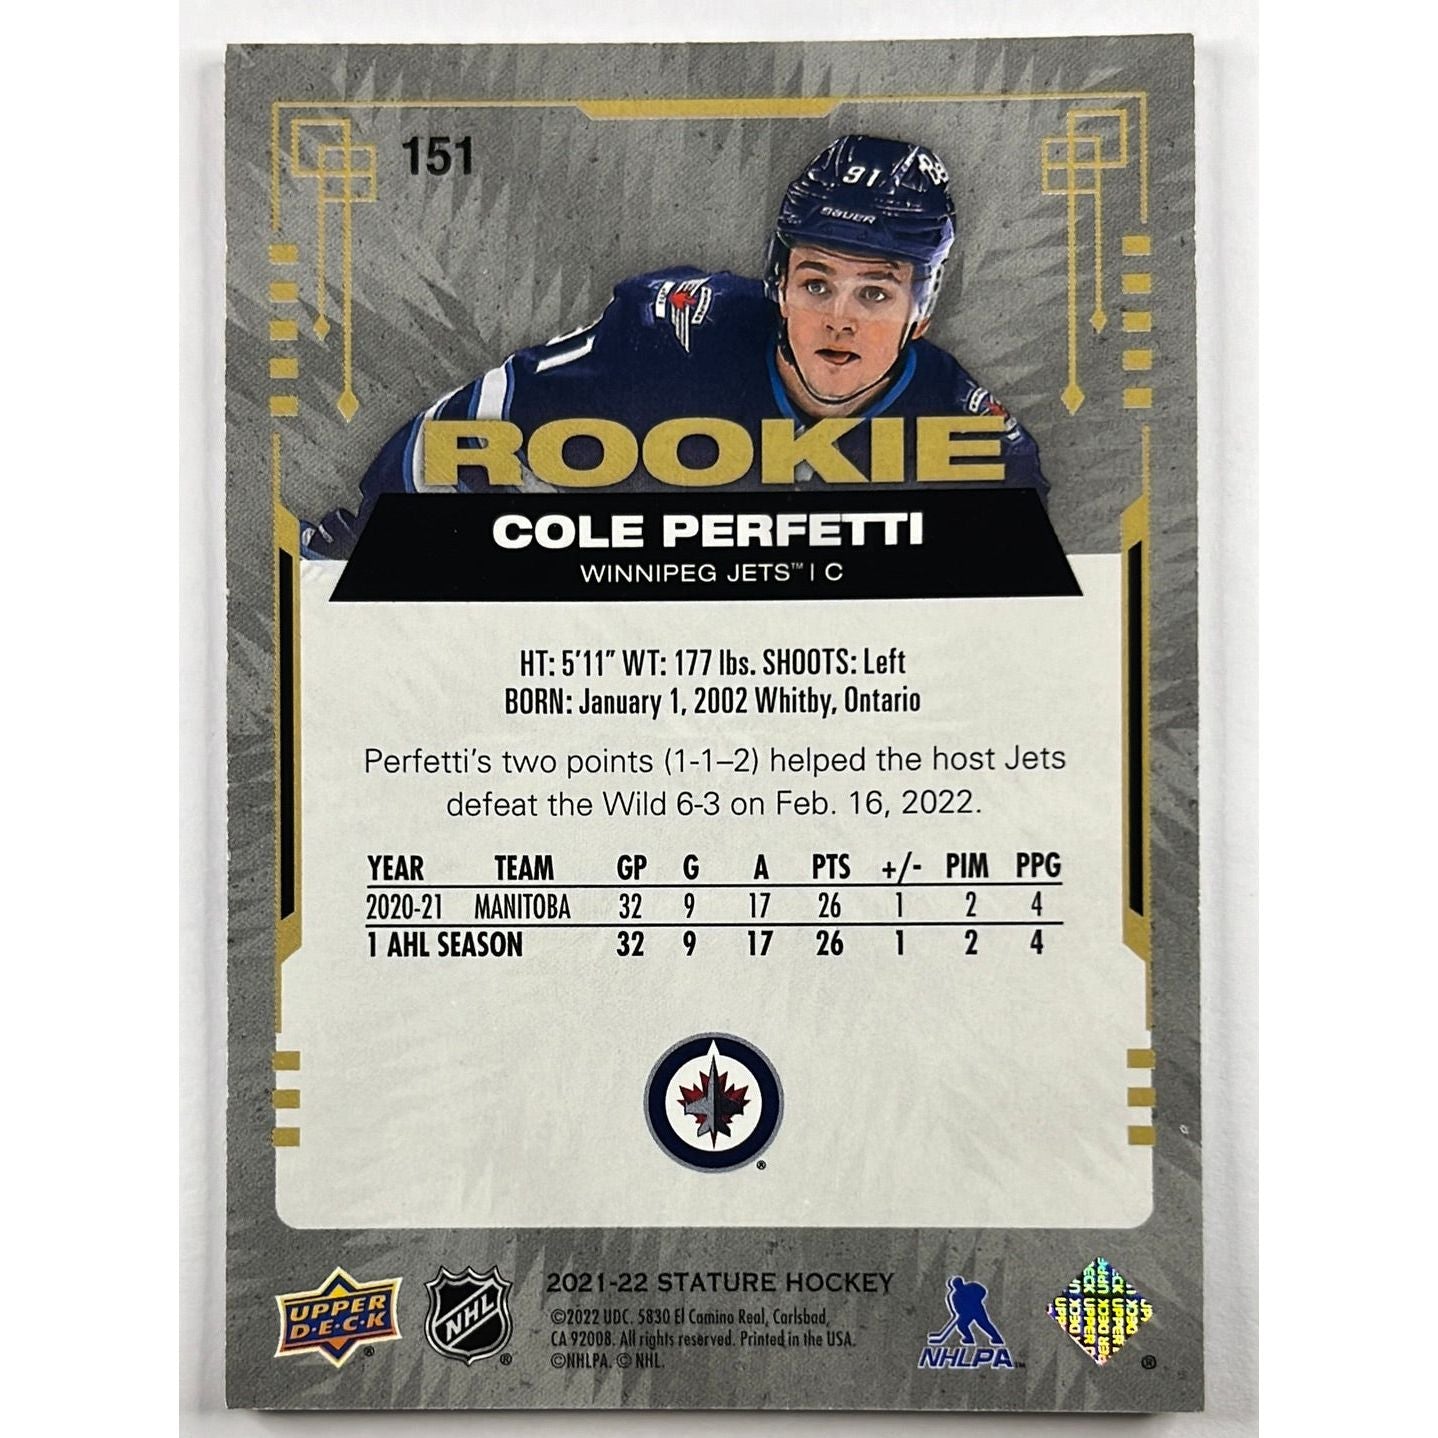 2021-22 Stature Cole Perfetti Red Rookie /75